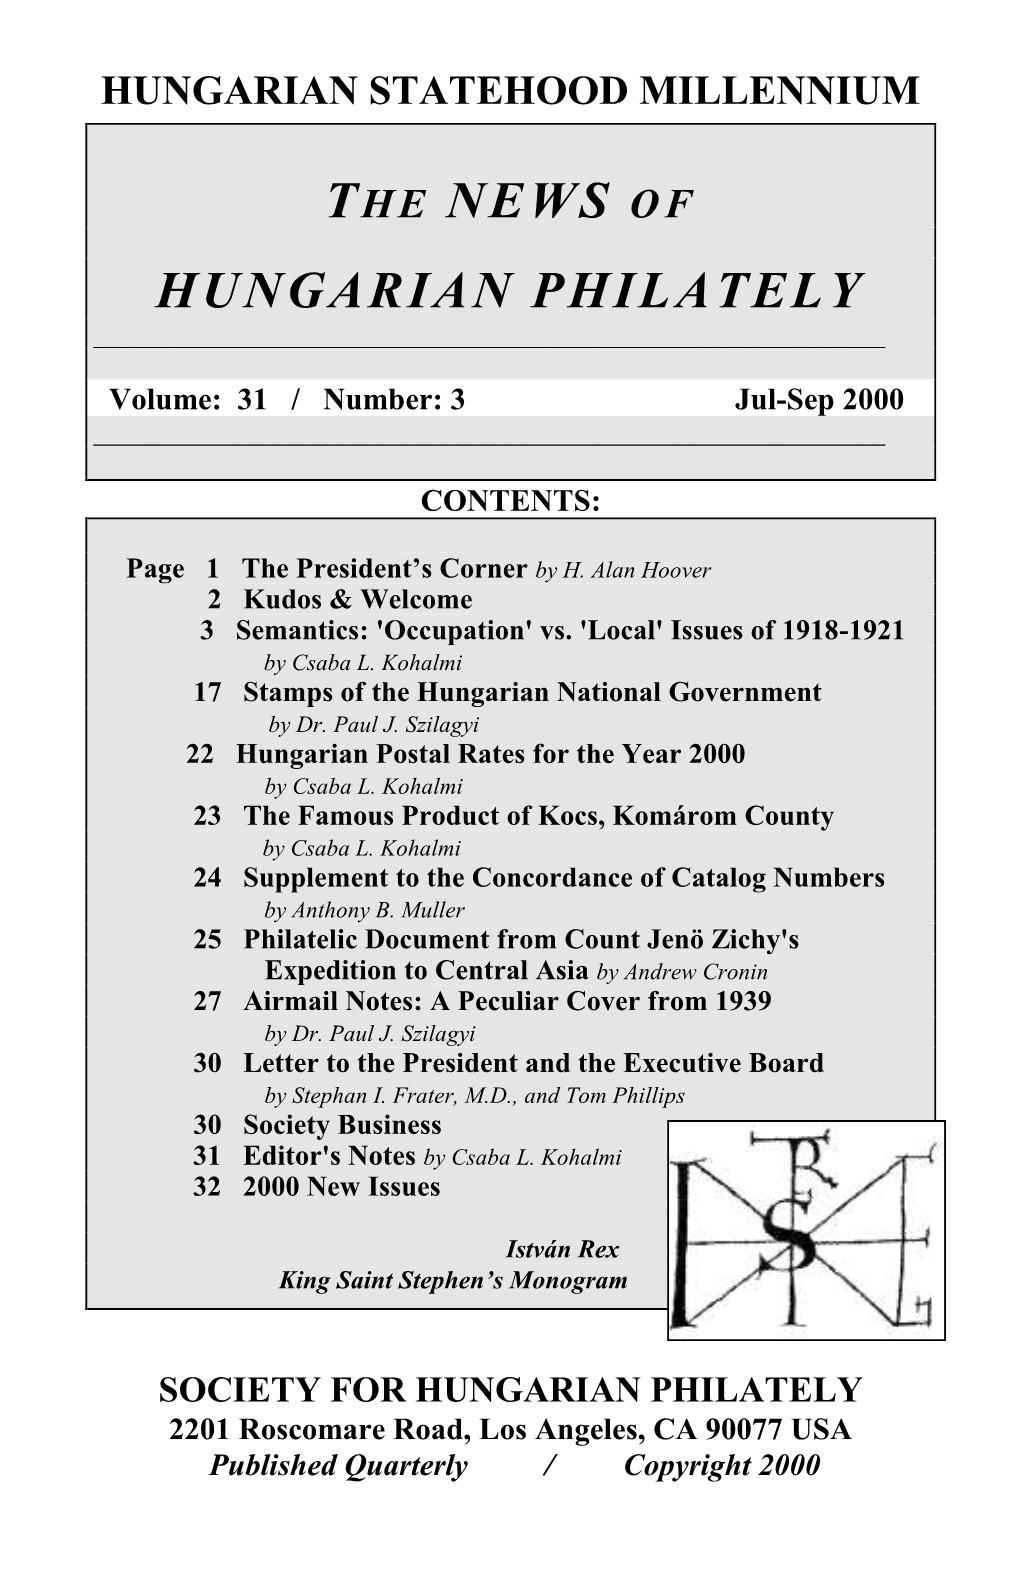 The News of Hungarian Philately, Jul-Sep 2000 32 the News of Hungarian Philately, Jul-Sep 2000 1